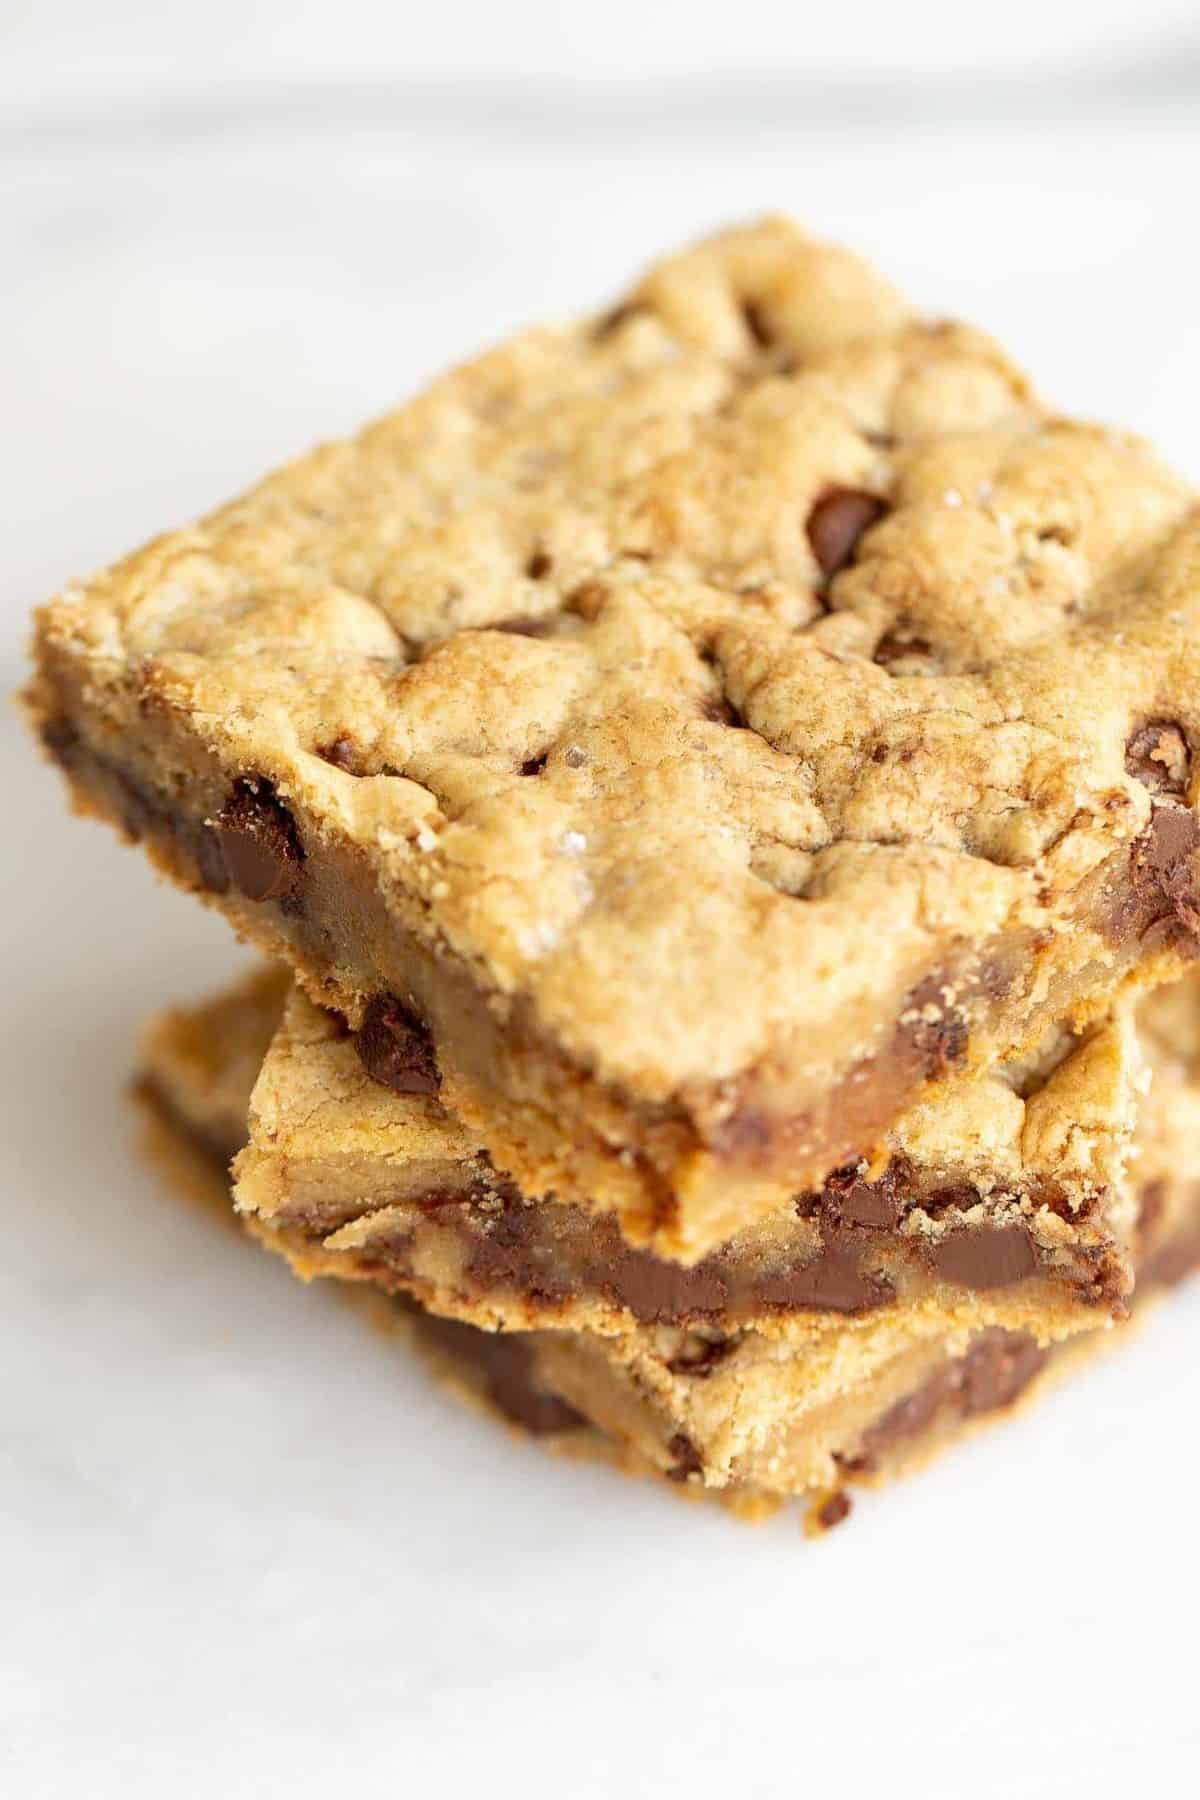 Stack of three cookie bars with chocolate chips and salted caramel.